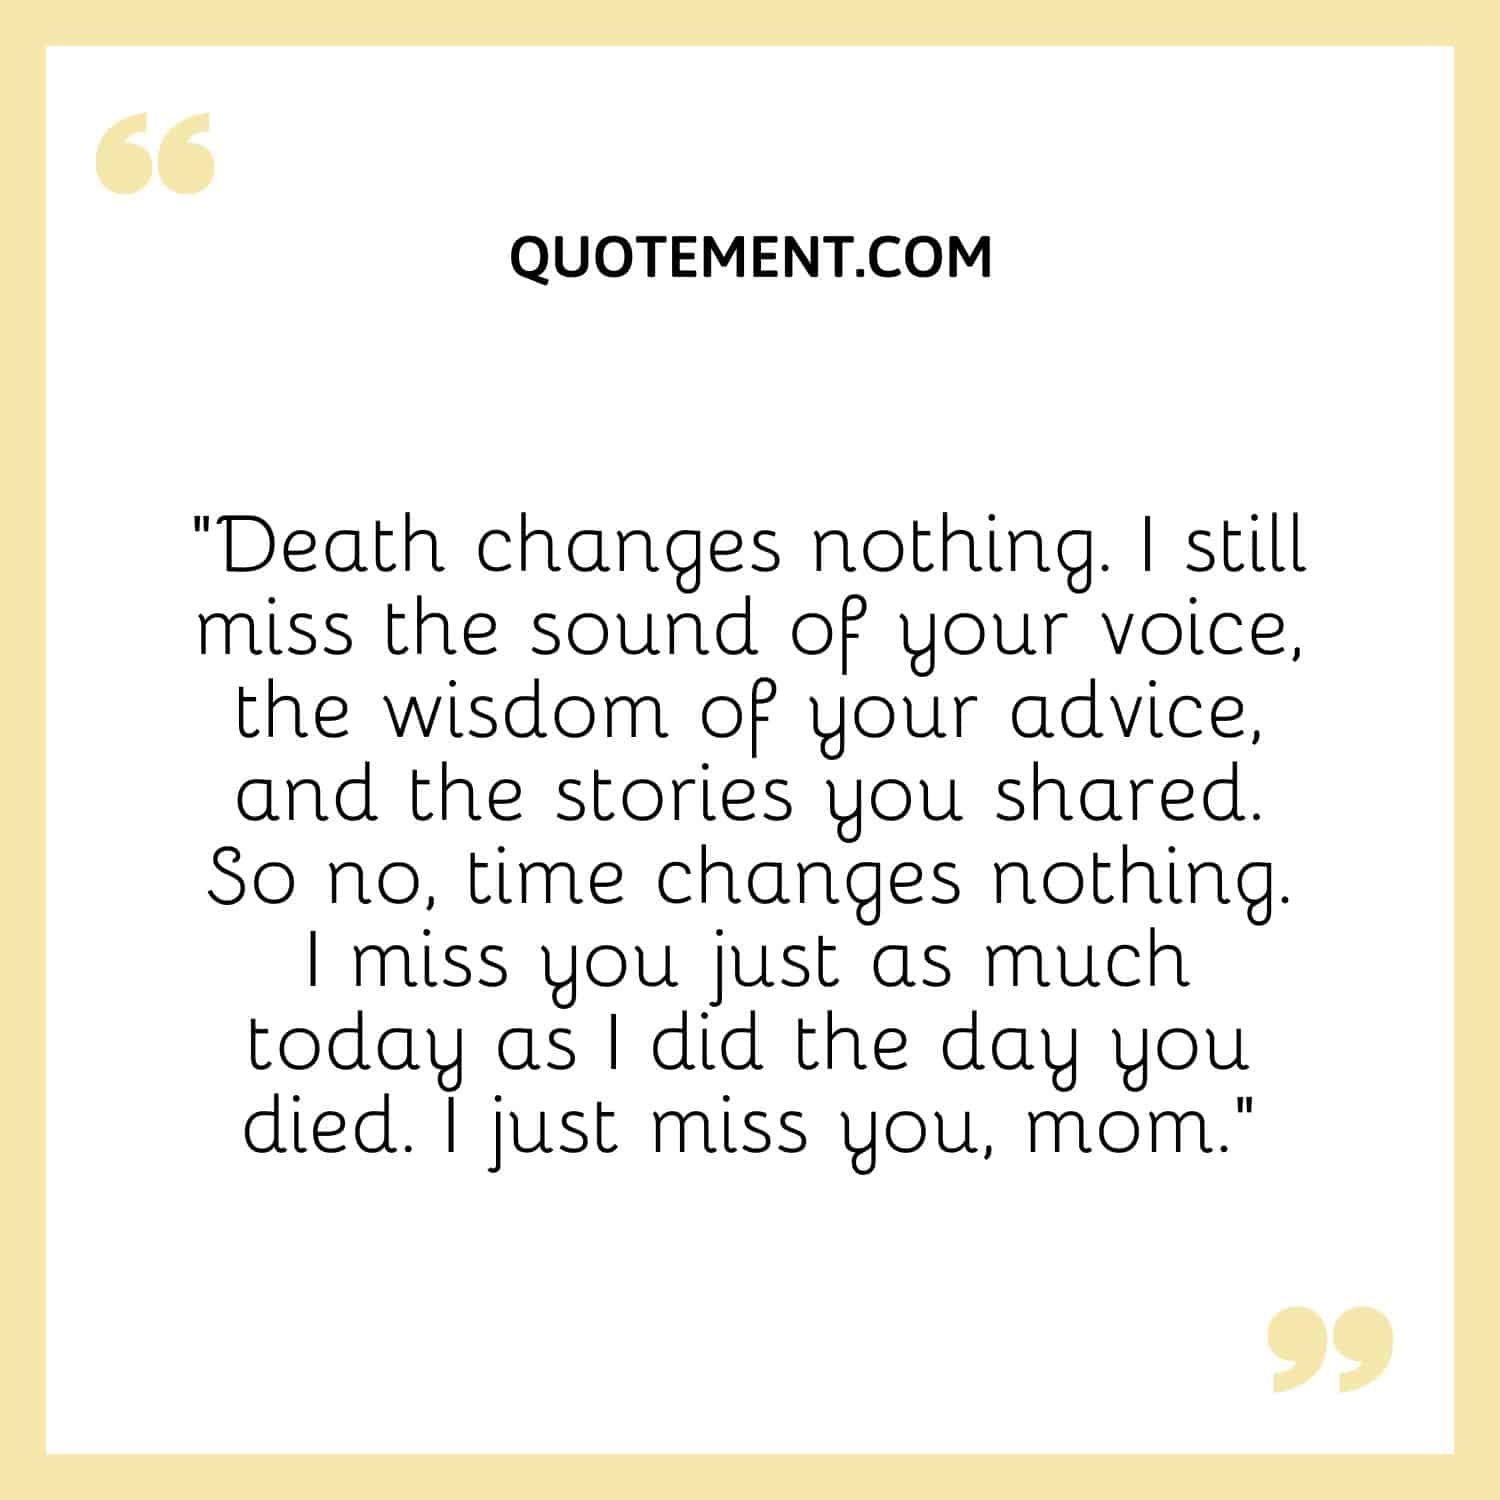 Death changes nothing.